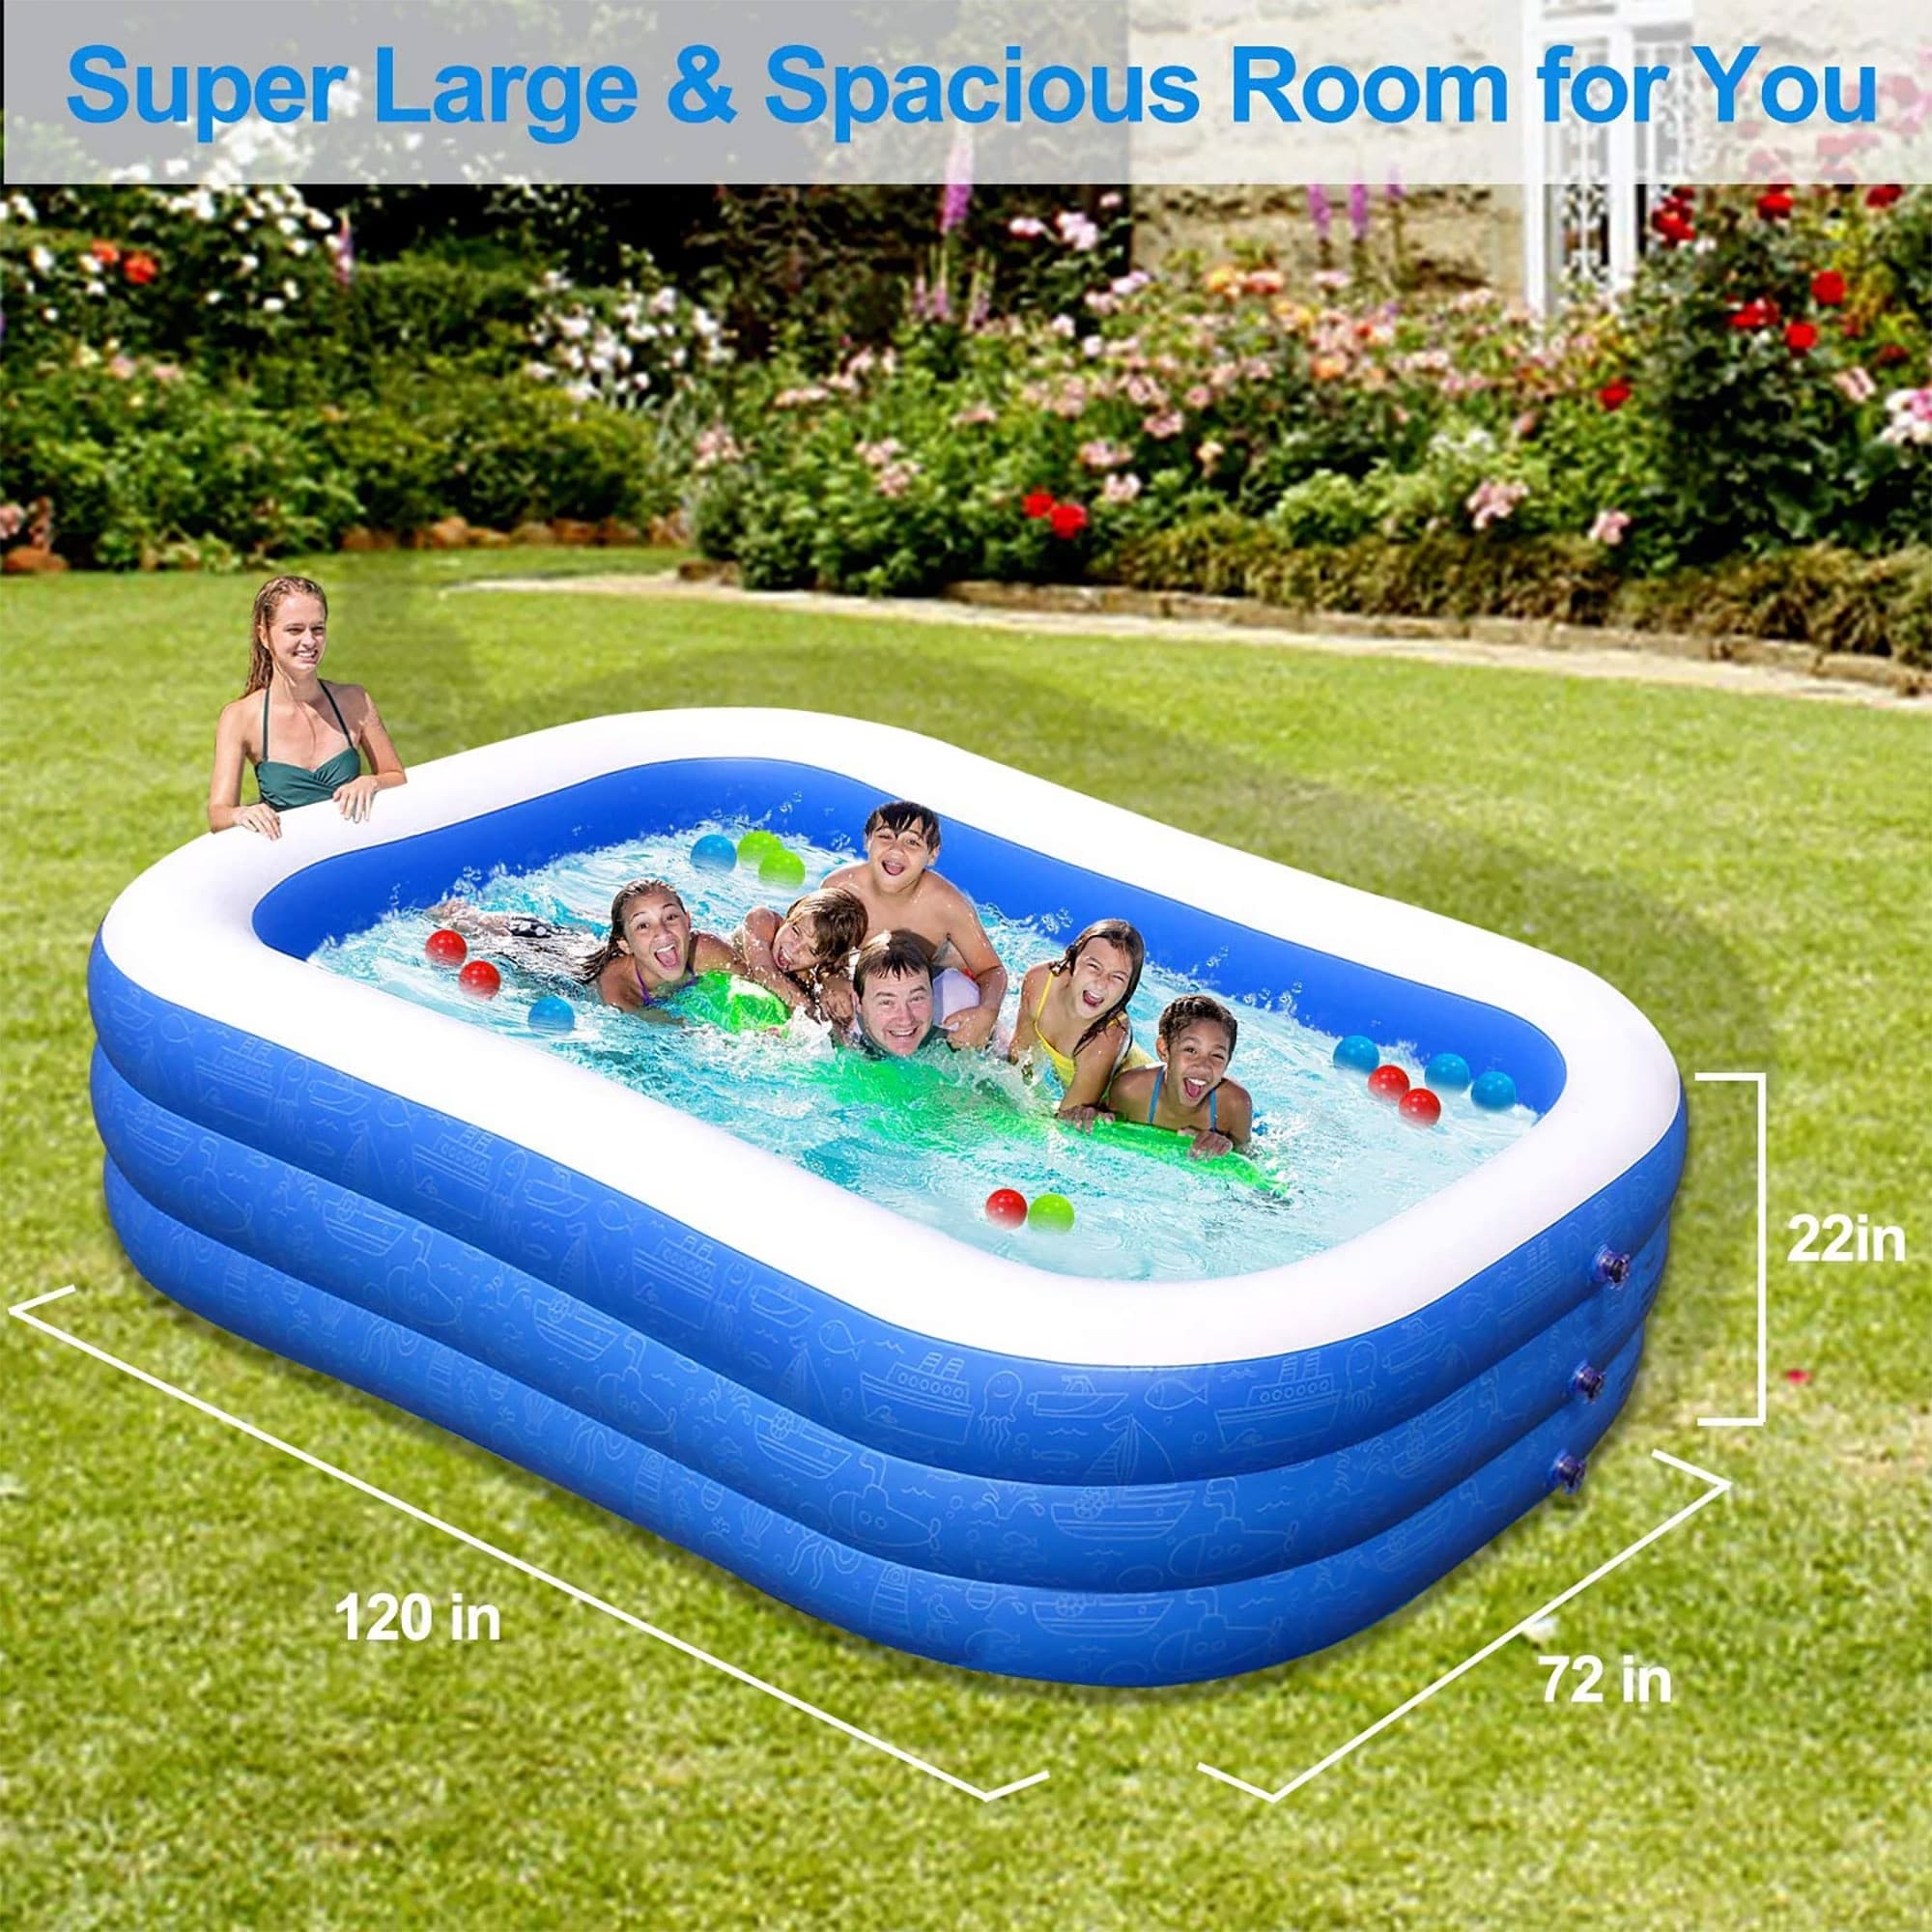 NEW DELUXE INFLATABLE FAMILY PADDING POOLS SUMMER SWIMMING POOL 120" X 72" X 22" 